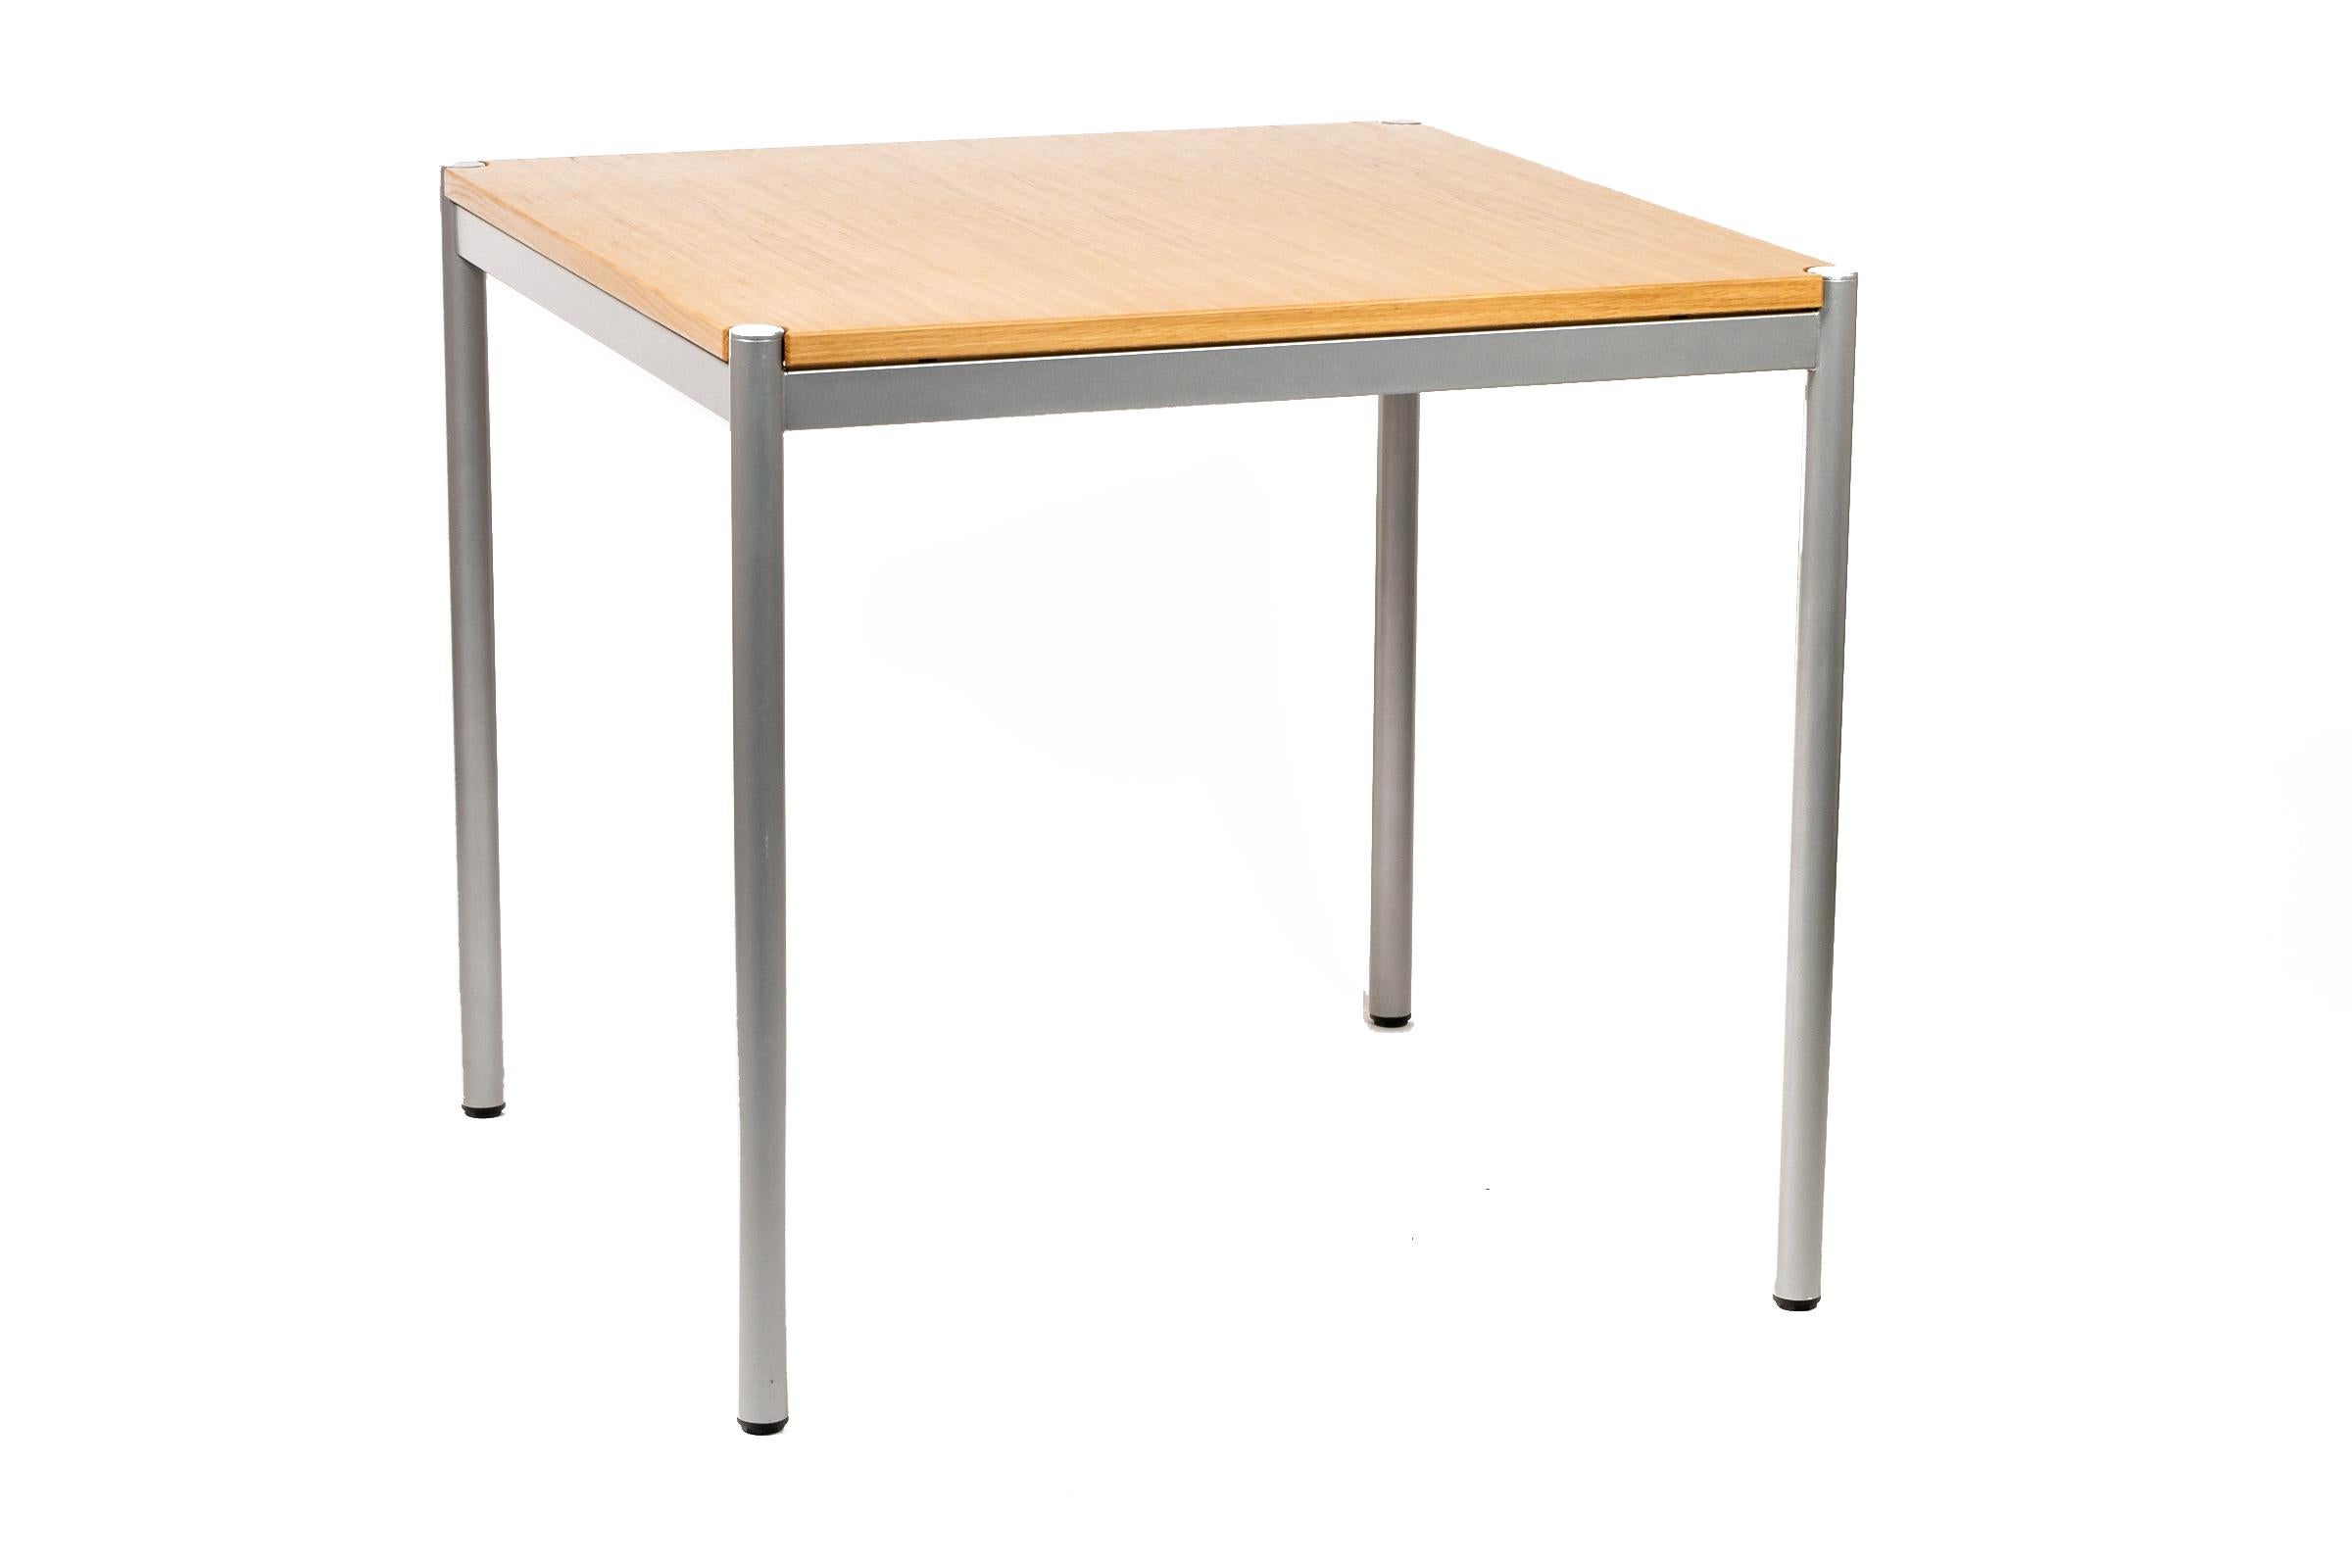 The Atos II table is a Classic modern table that offers a solid and durable solution for various applications. For instance: Home office table or cafeteria table.

The Atos collection is a Mid-Century Modern Classic originally designed by Edlef